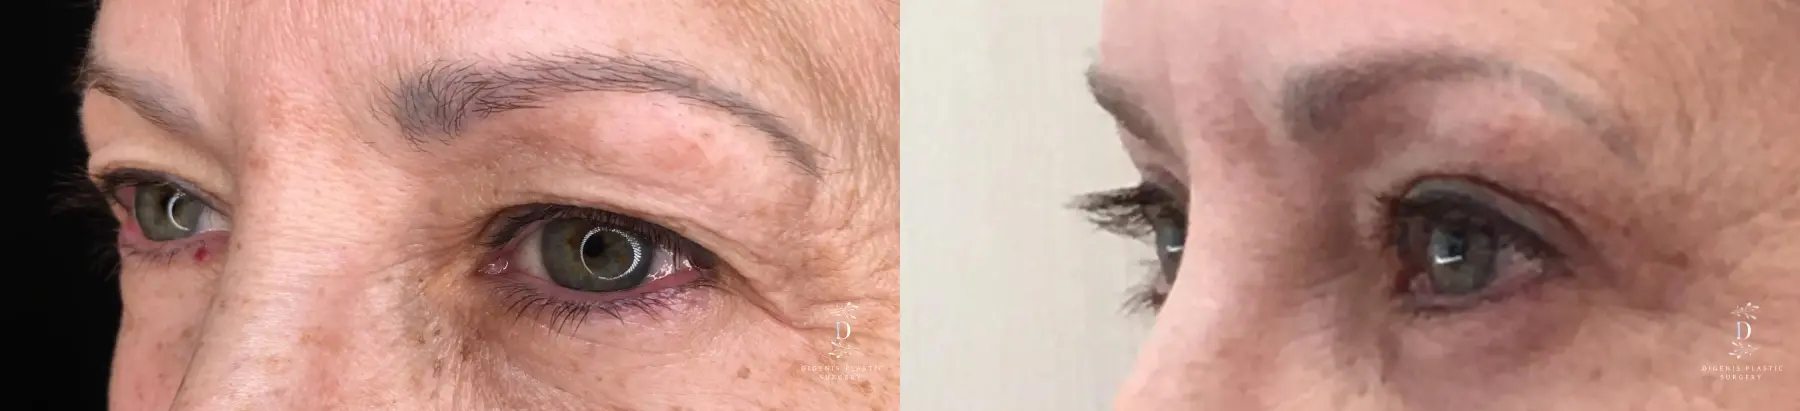 Eyelid Surgery: Patient 29 - Before and After 4